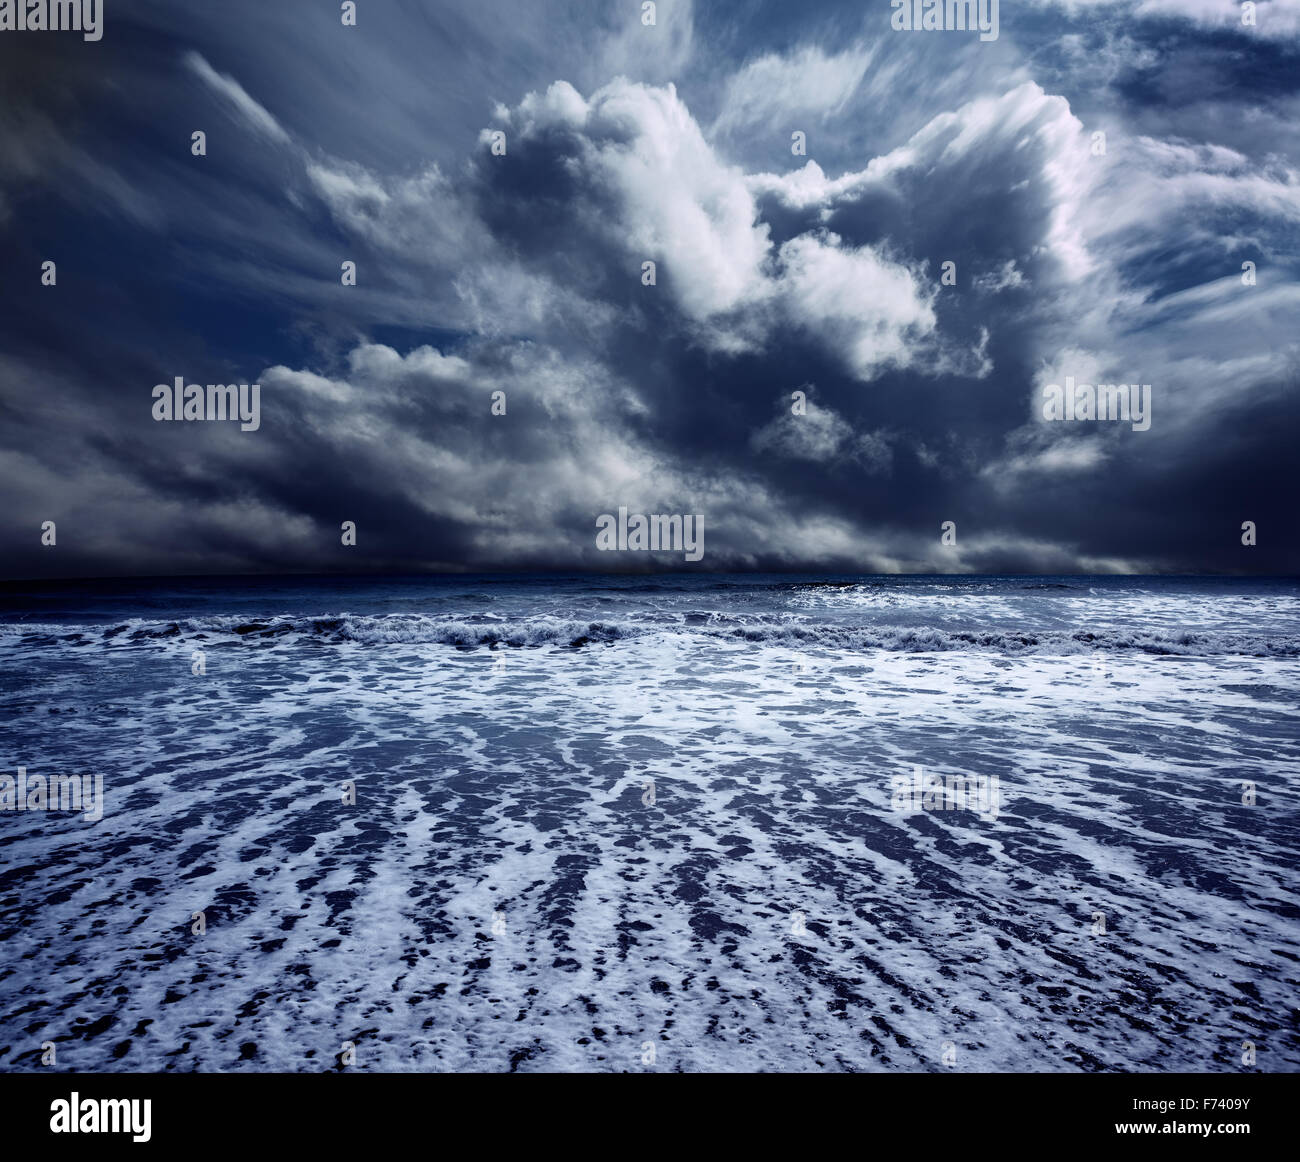 Background ocean storm with waves and clouds Stock Photo